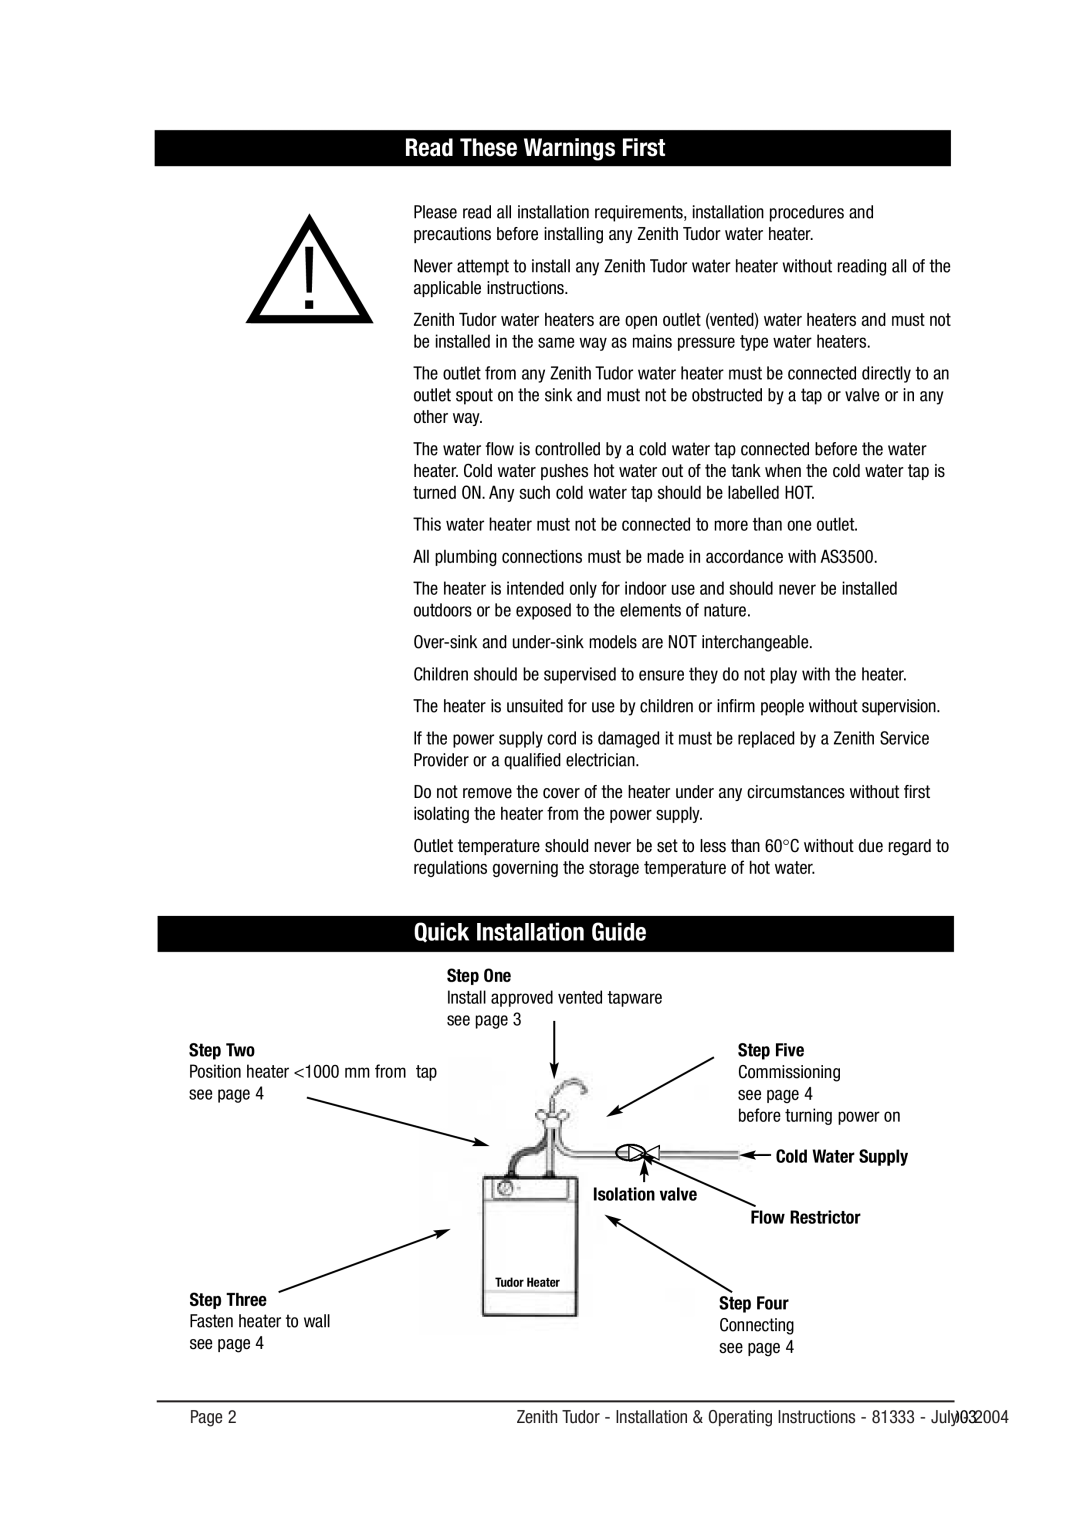 Zenith 216666666 Quick Installation Guide, Read These Warnings First, Step One, Step Two, Step Five, Flow Restrictor 